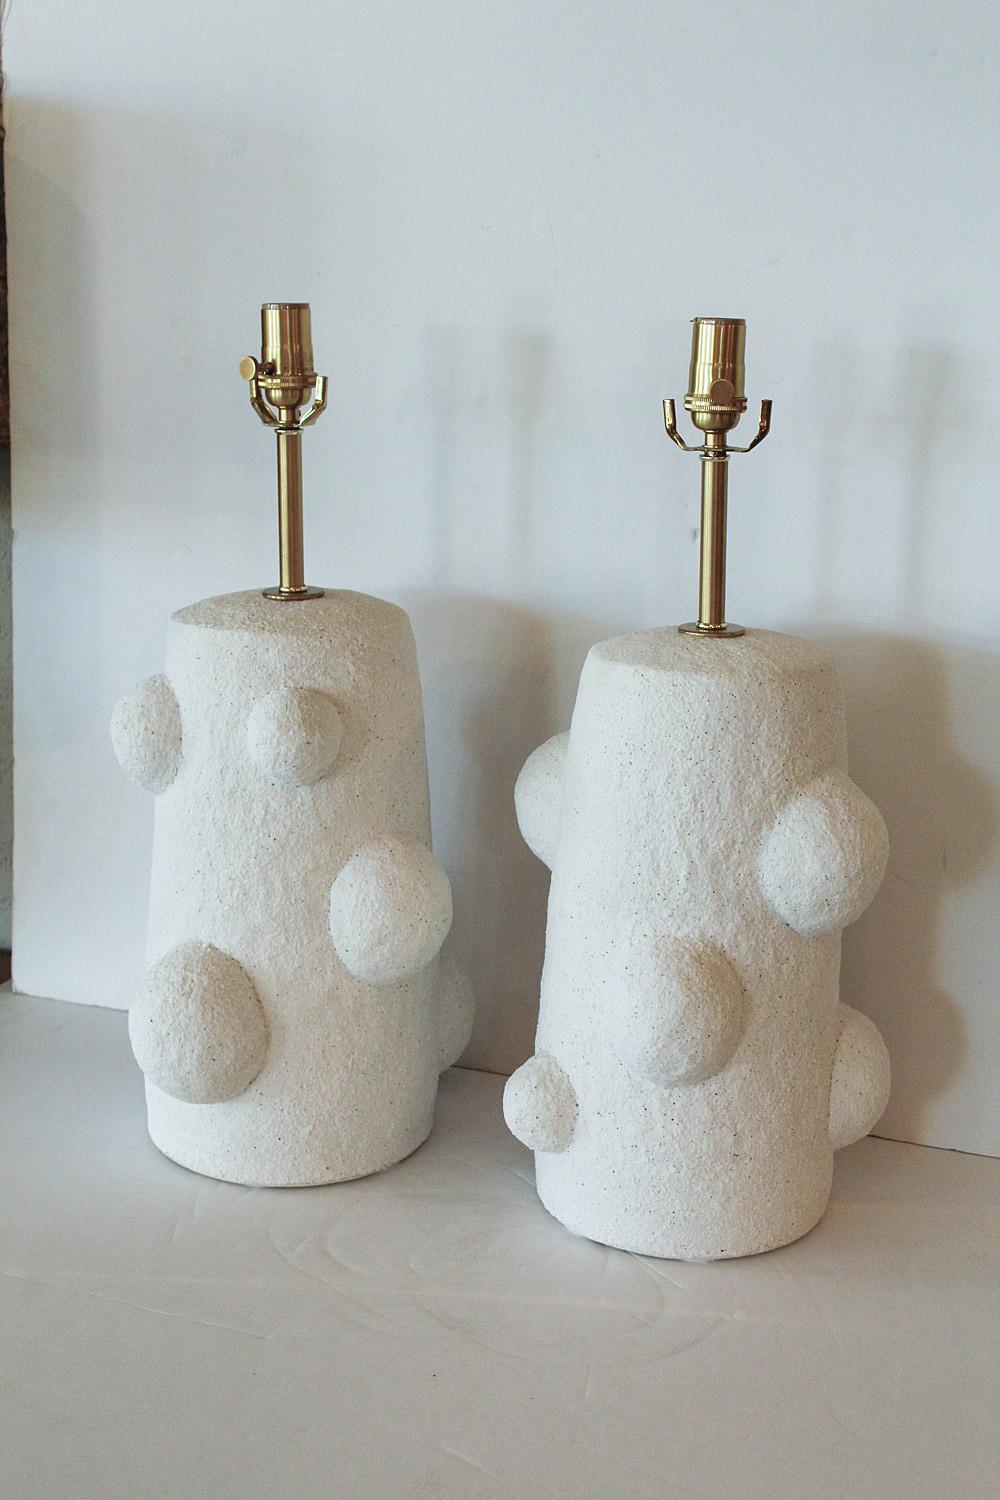 White sand glazed stoneware lamps, handcrafted exclusively for Stripe Vintage Modern by ceramic artist Priscilla Hollingsworth. No molds are used in their manufacture - each pair is entirely hand-built and unique. Solid brass hardware with white